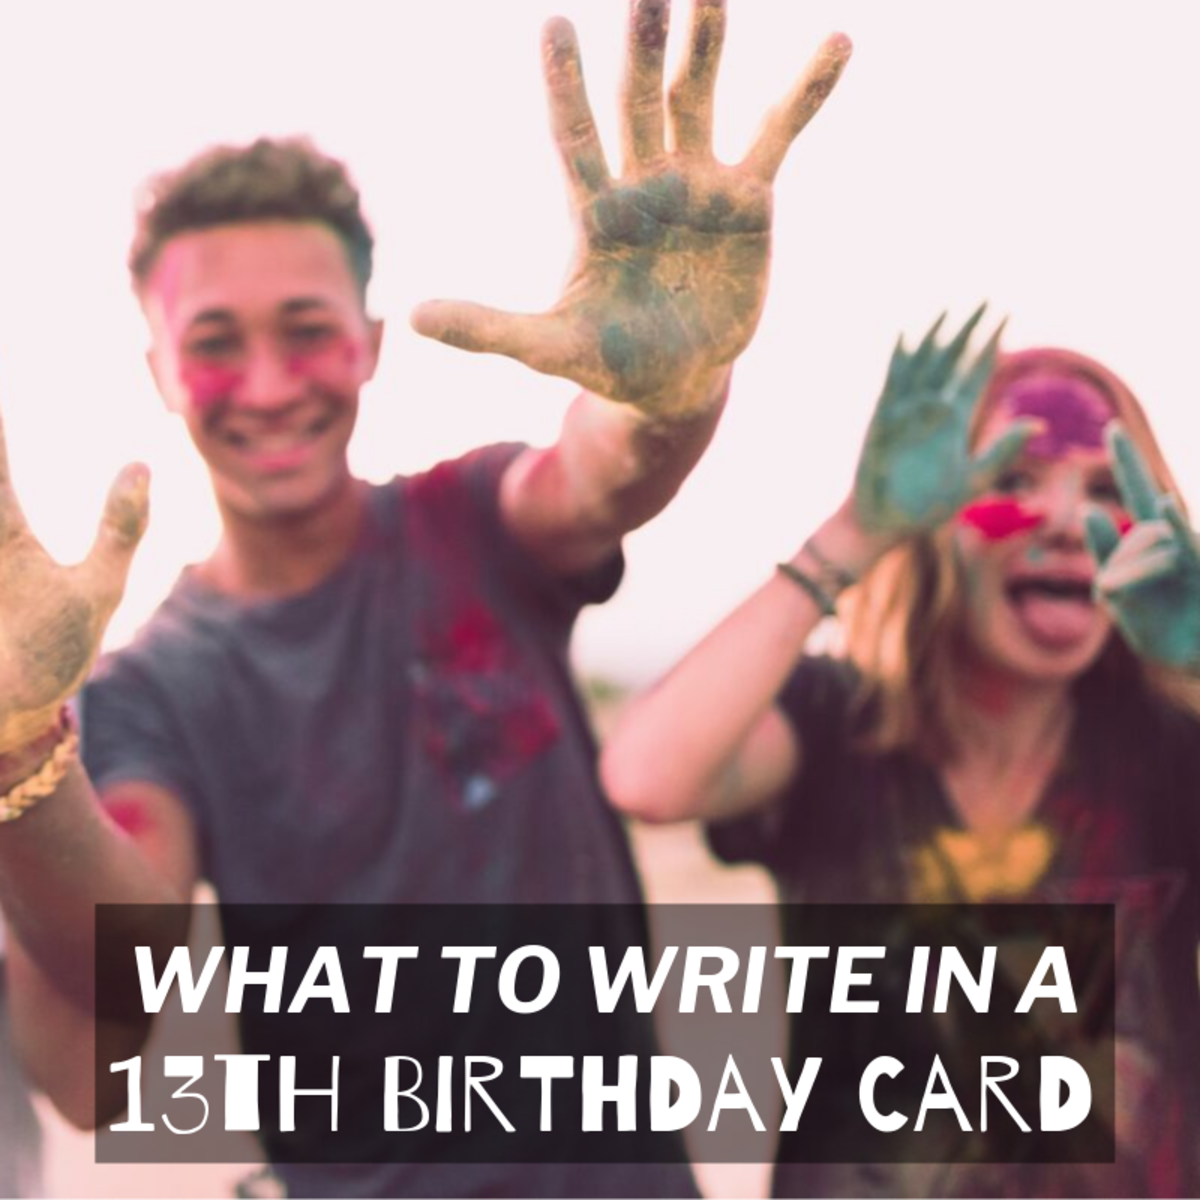 13th Birthday Wishes: What to Write in a Card